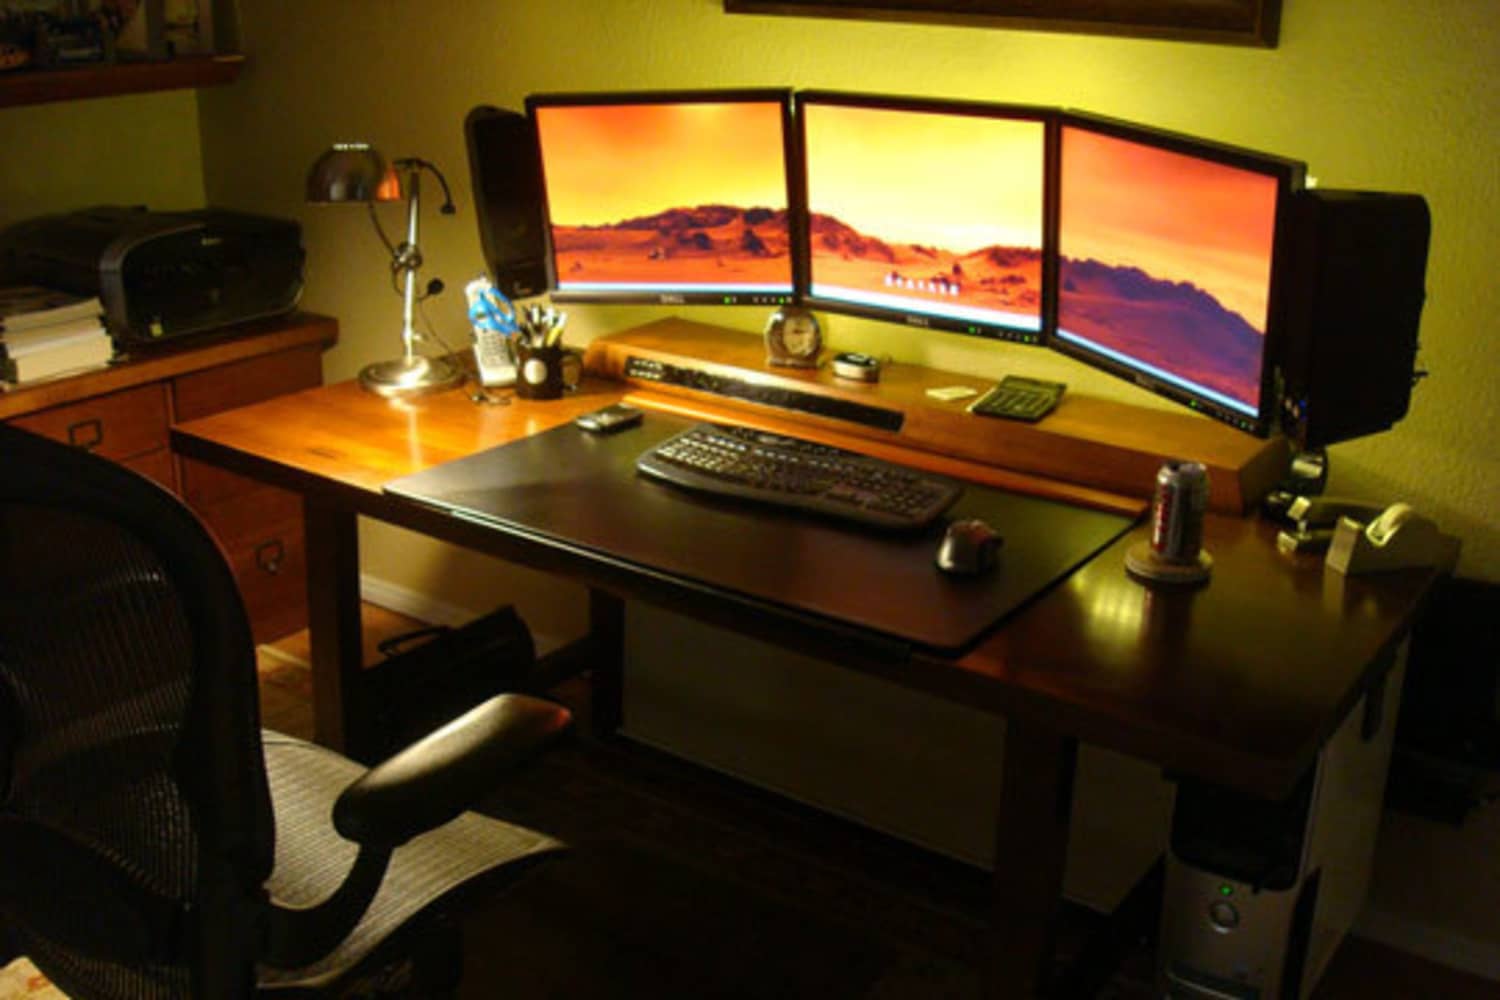 The Best Monitor Stands to Upgrade Your Home Office